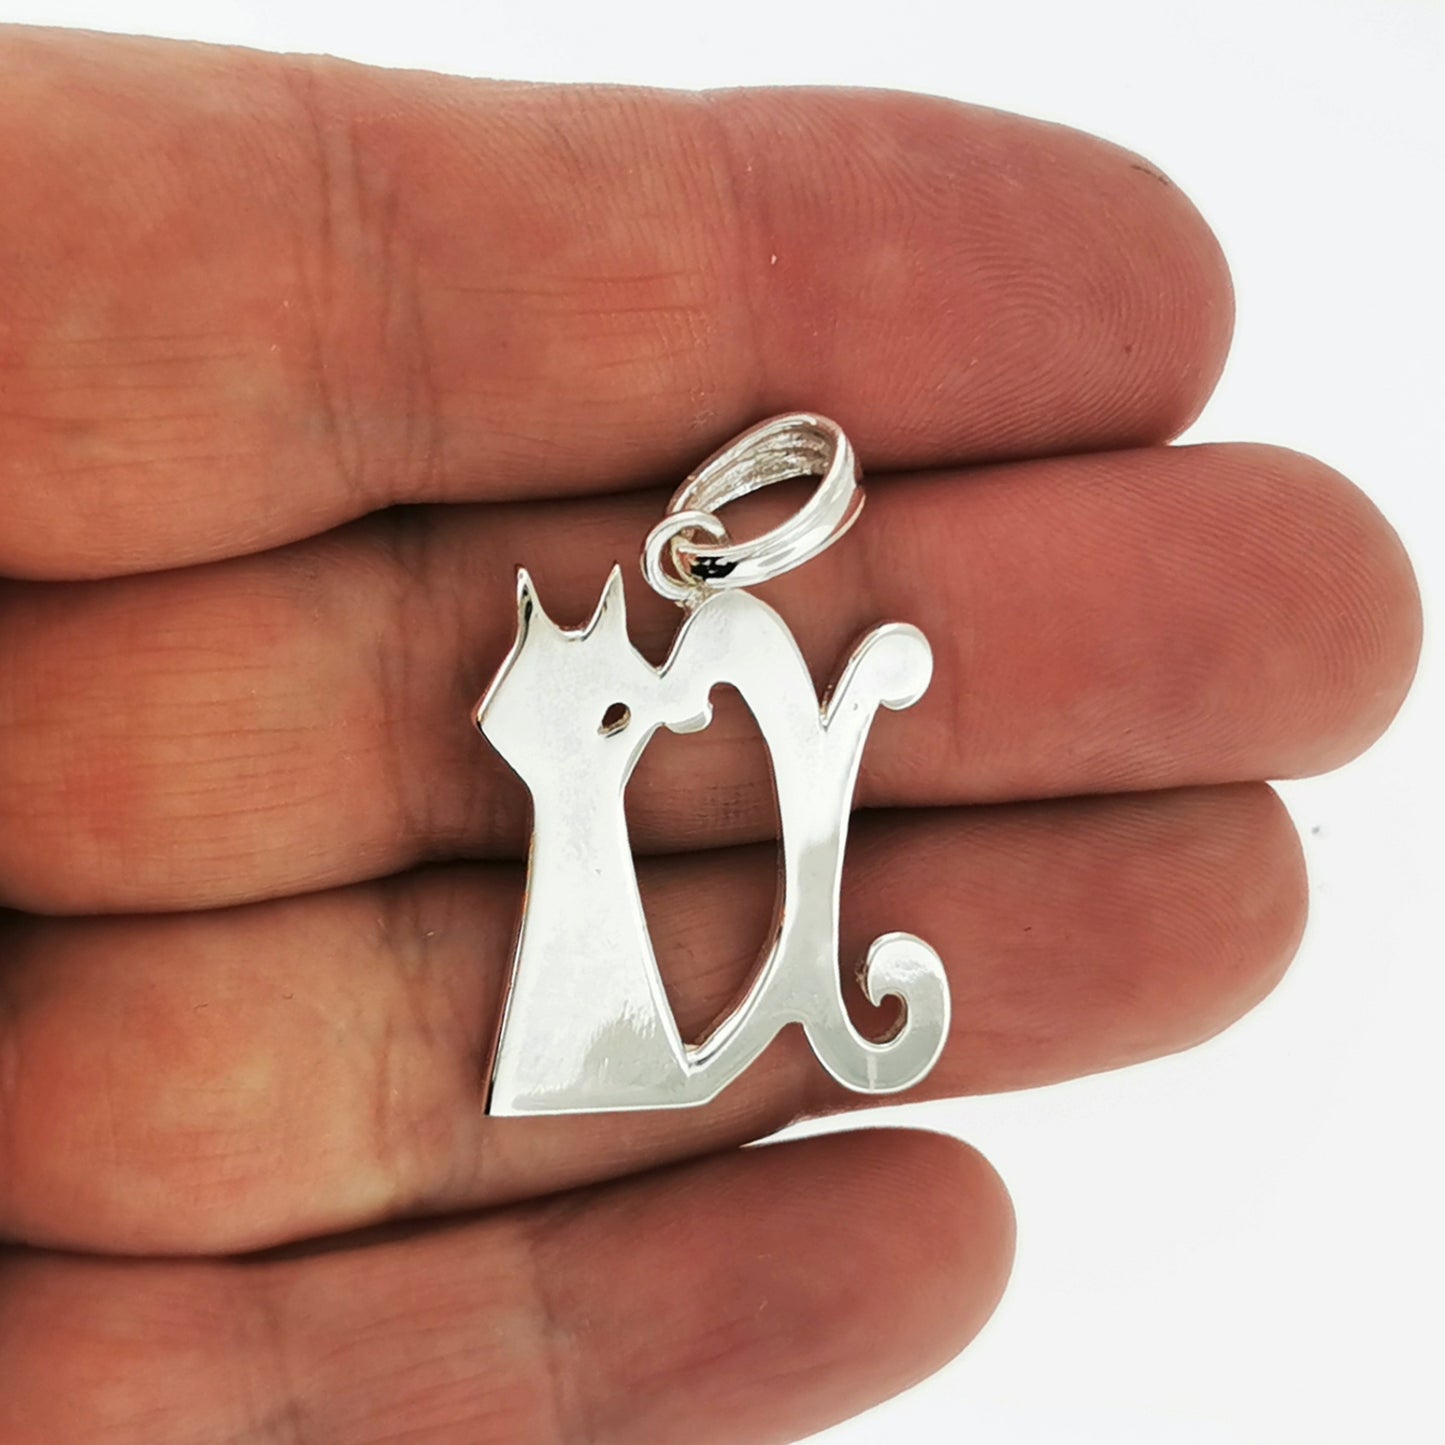 Cait Shelter Pendant in Sterling Silver or Antique Bronze, Fairy Tail Guild Pendant, Anime Fan Pendant, Fairy Tail Cosplay Pendant, Anime Cosplay Jewelry, Cait Shelter Jewelry, Fairy Tail Pendant, Silver Fairy Tail, Silver Fairy Tail Pendant